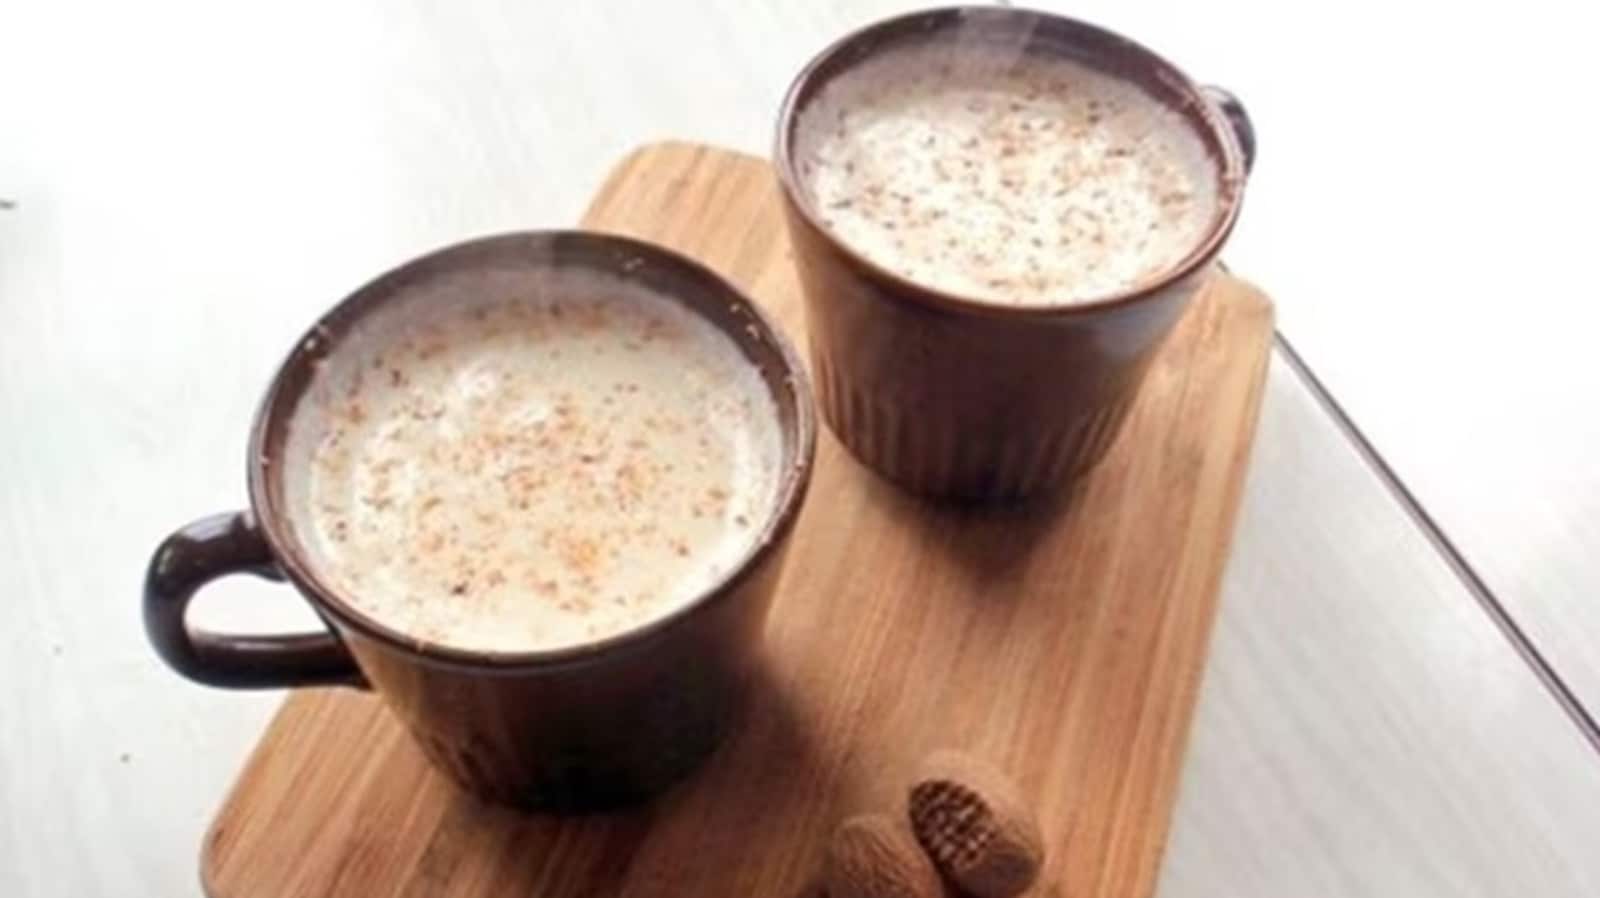 Bedtime superfood: Wonderful benefits of drinking a glass of nutmeg milk